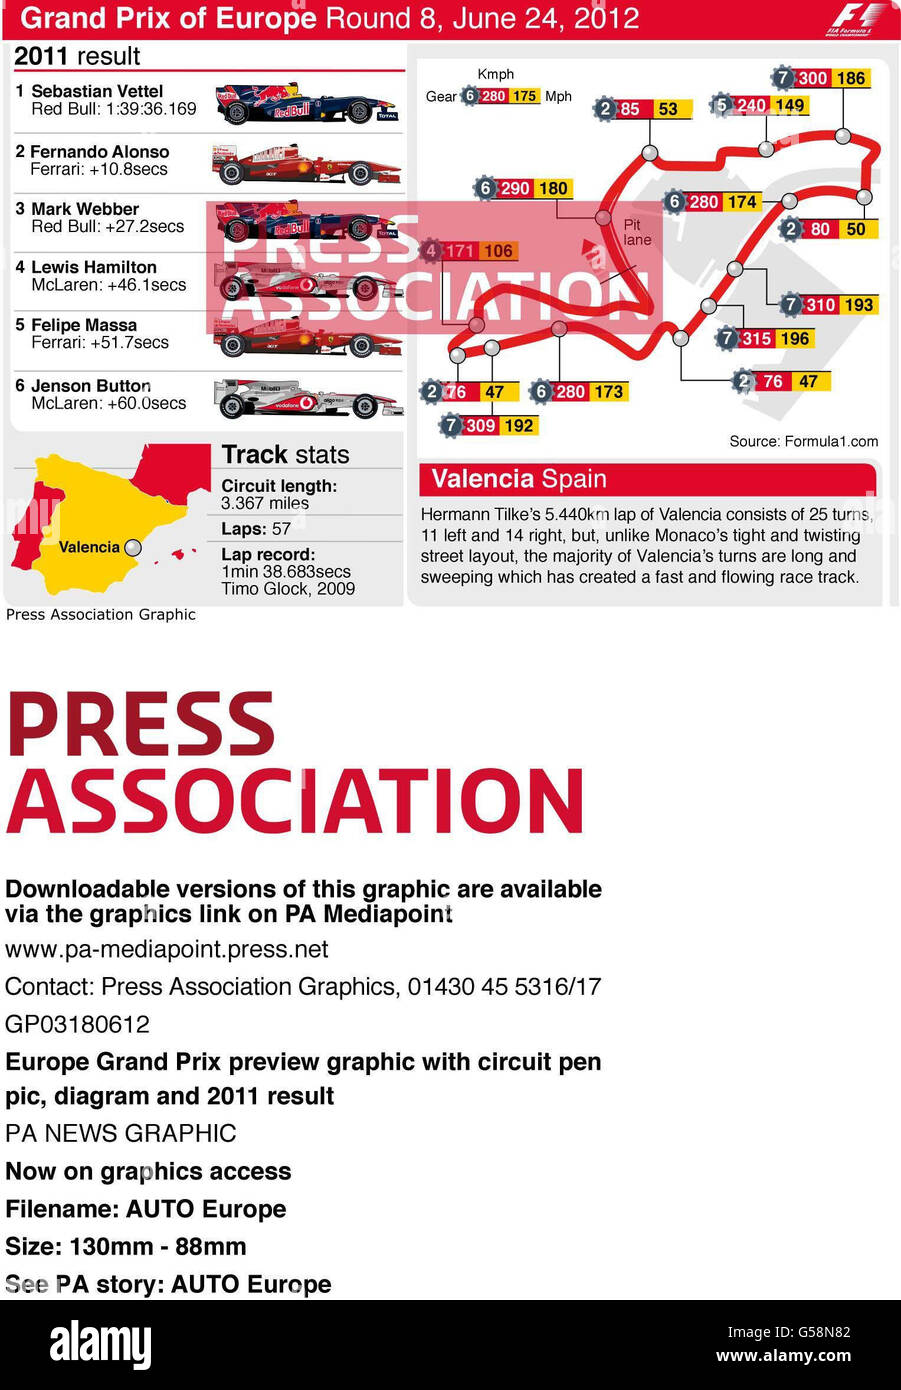 Europe Grand Prix preview with circuit pen-pic, diagram and 2011 result Stock Photo